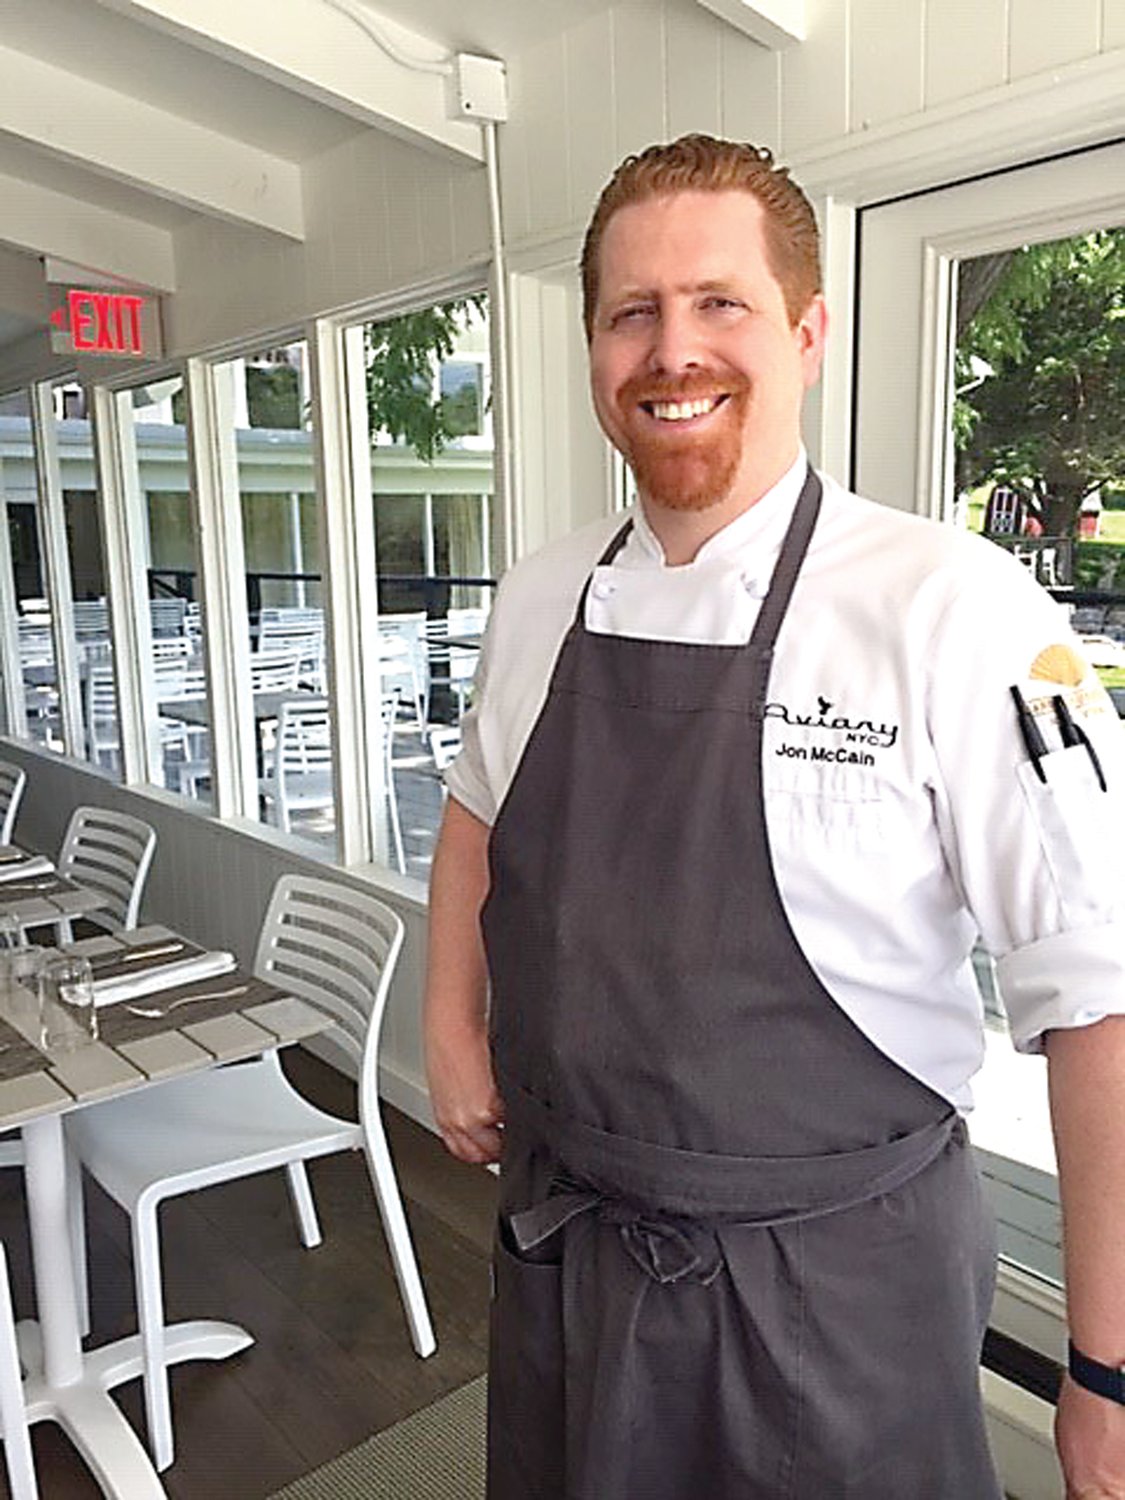 Jon McCain, new executive chef at Cascade Restaurants at Durham Springs, in the new Cascade Café, which opened June 12. Photograph by Kathryn Finegan Clark.